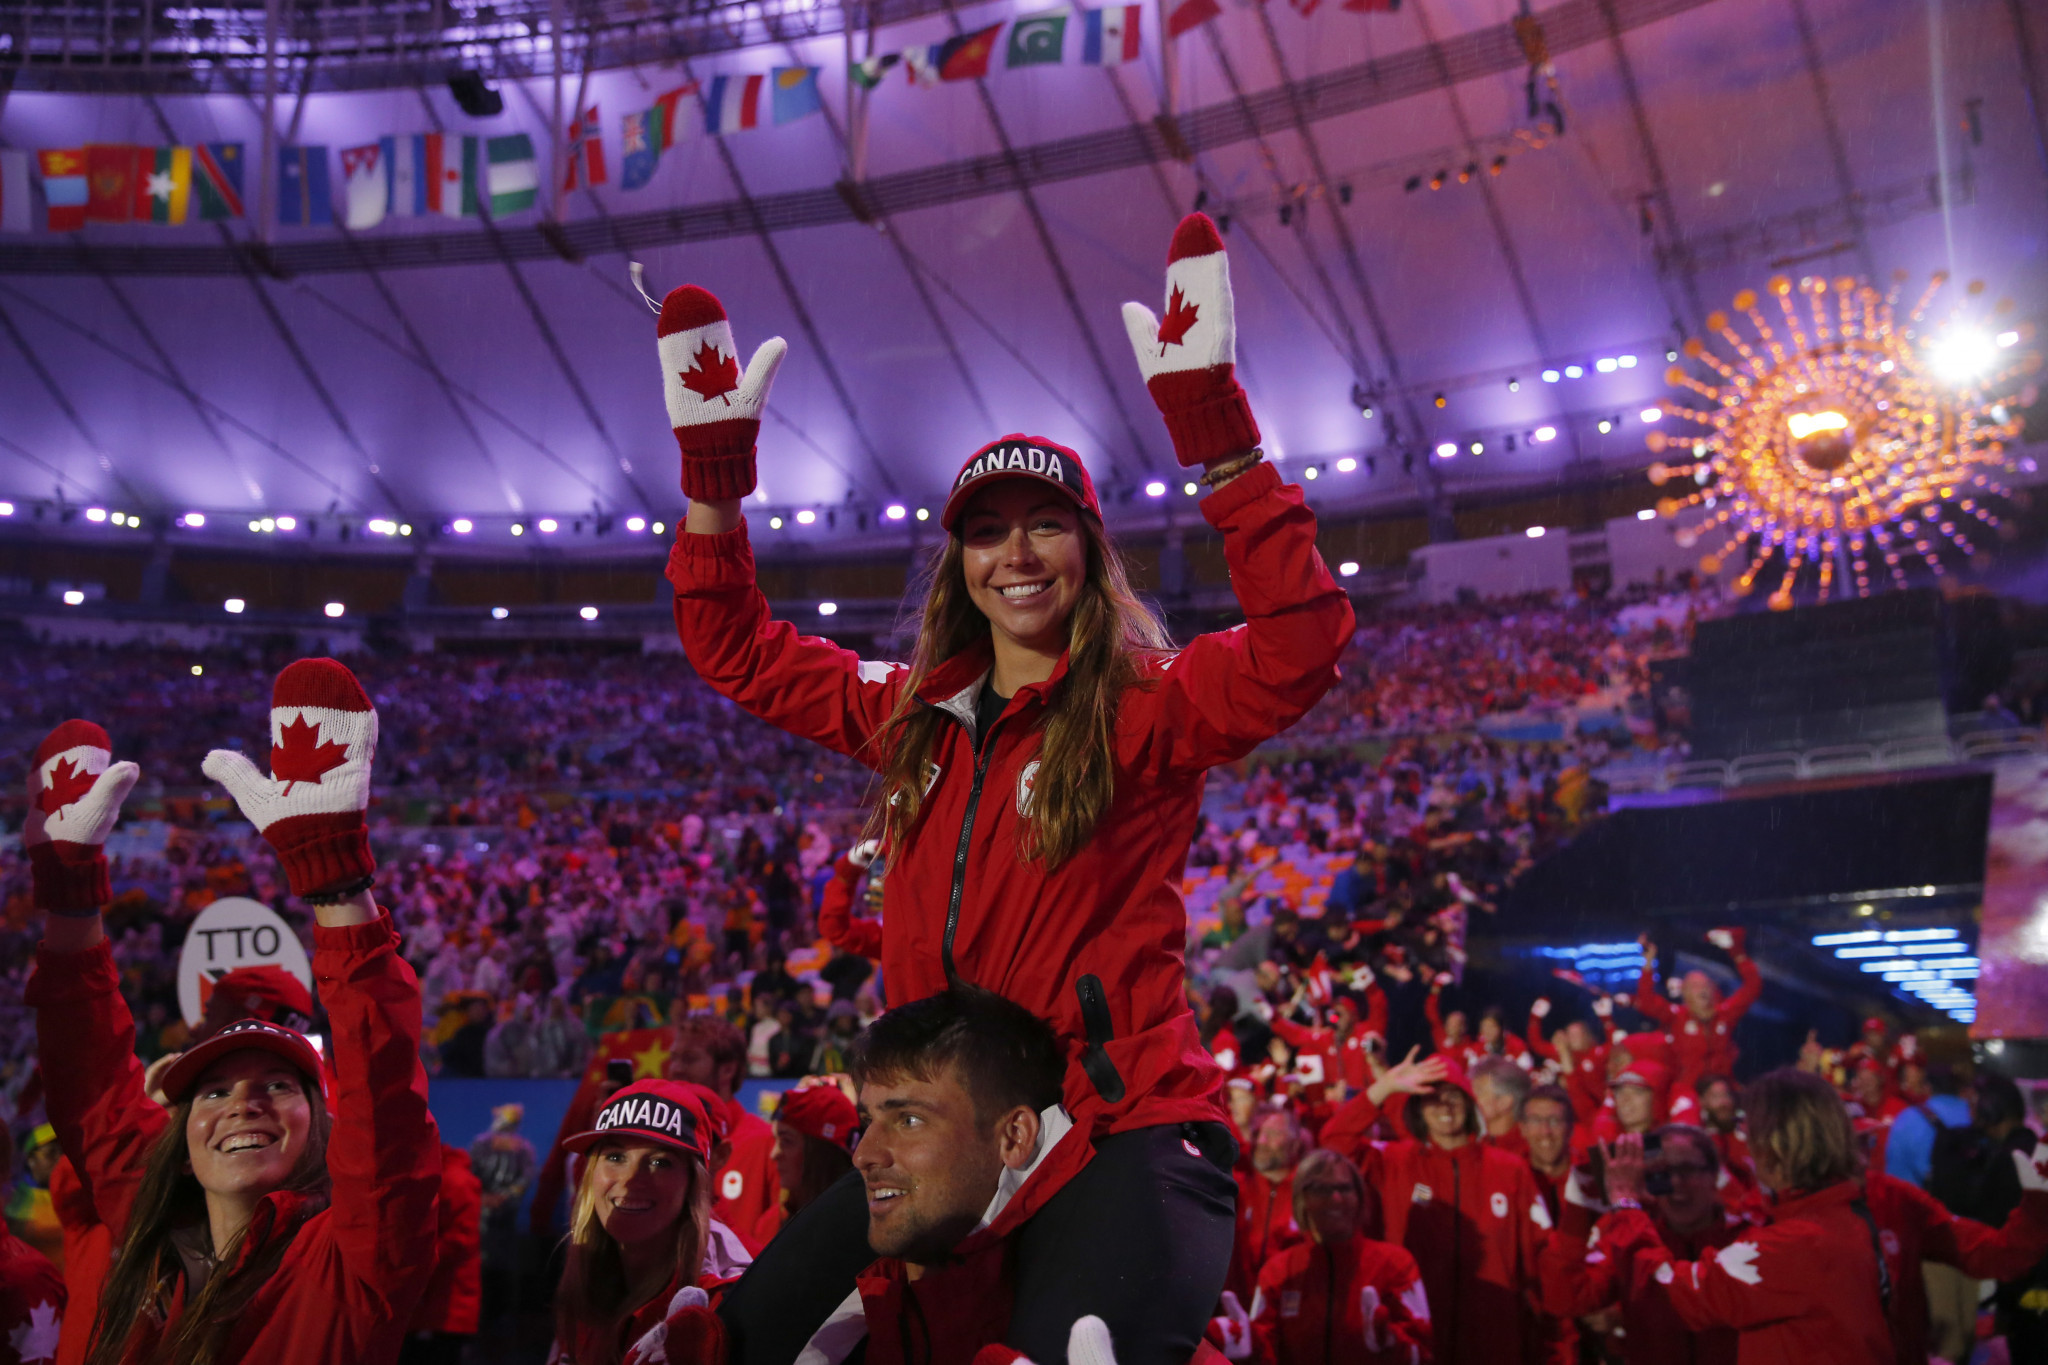 Ontario Government provides $21 million in funding for Olympic and Paralympic athletes